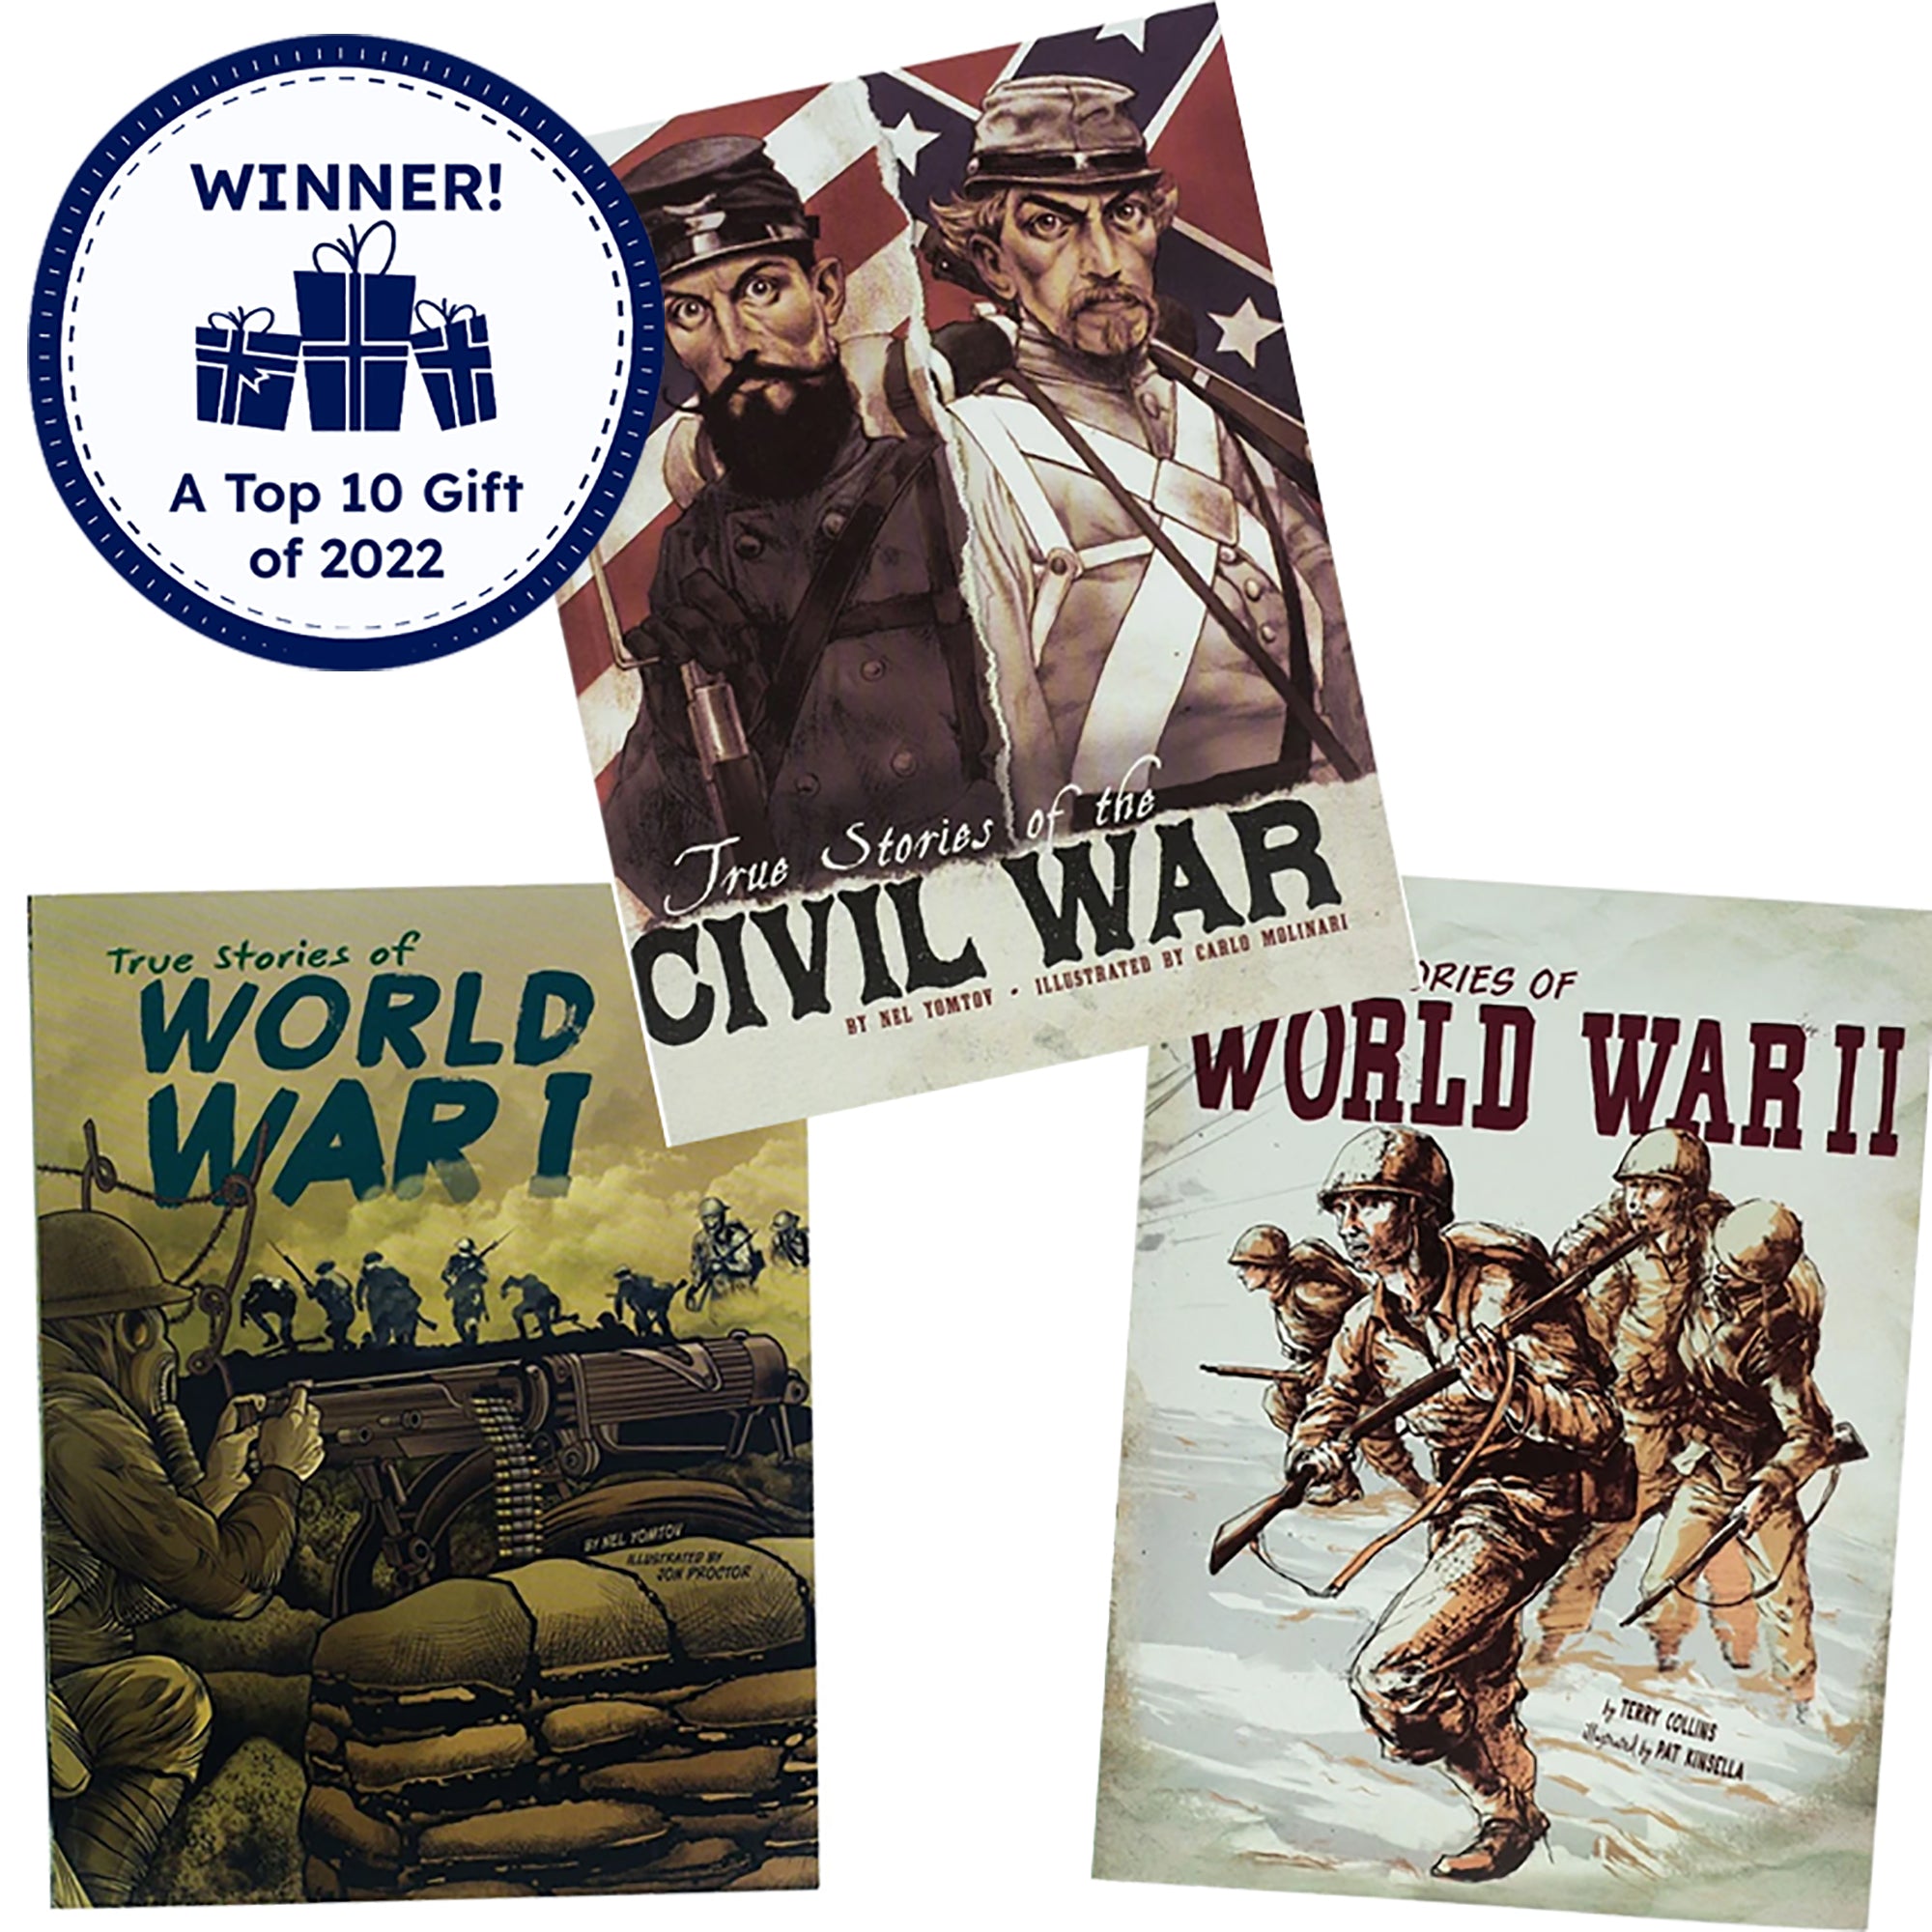 True Stories of War, set of 3 graphic novels. True Stories of World War 1 (bottom-left) shows a man controlling a war gun while soldiers head into battle. True Stories of the Civil War (top-middle) shows 2 soldiers divided. The left soldier stands in front of the American flag. The right soldier stands in front of a Confederate flag. True Stories of World War 2 (lower-right) shows 4 soldiers on moving through water with their weapons ready. The soldier to the right is holding up another soldier.